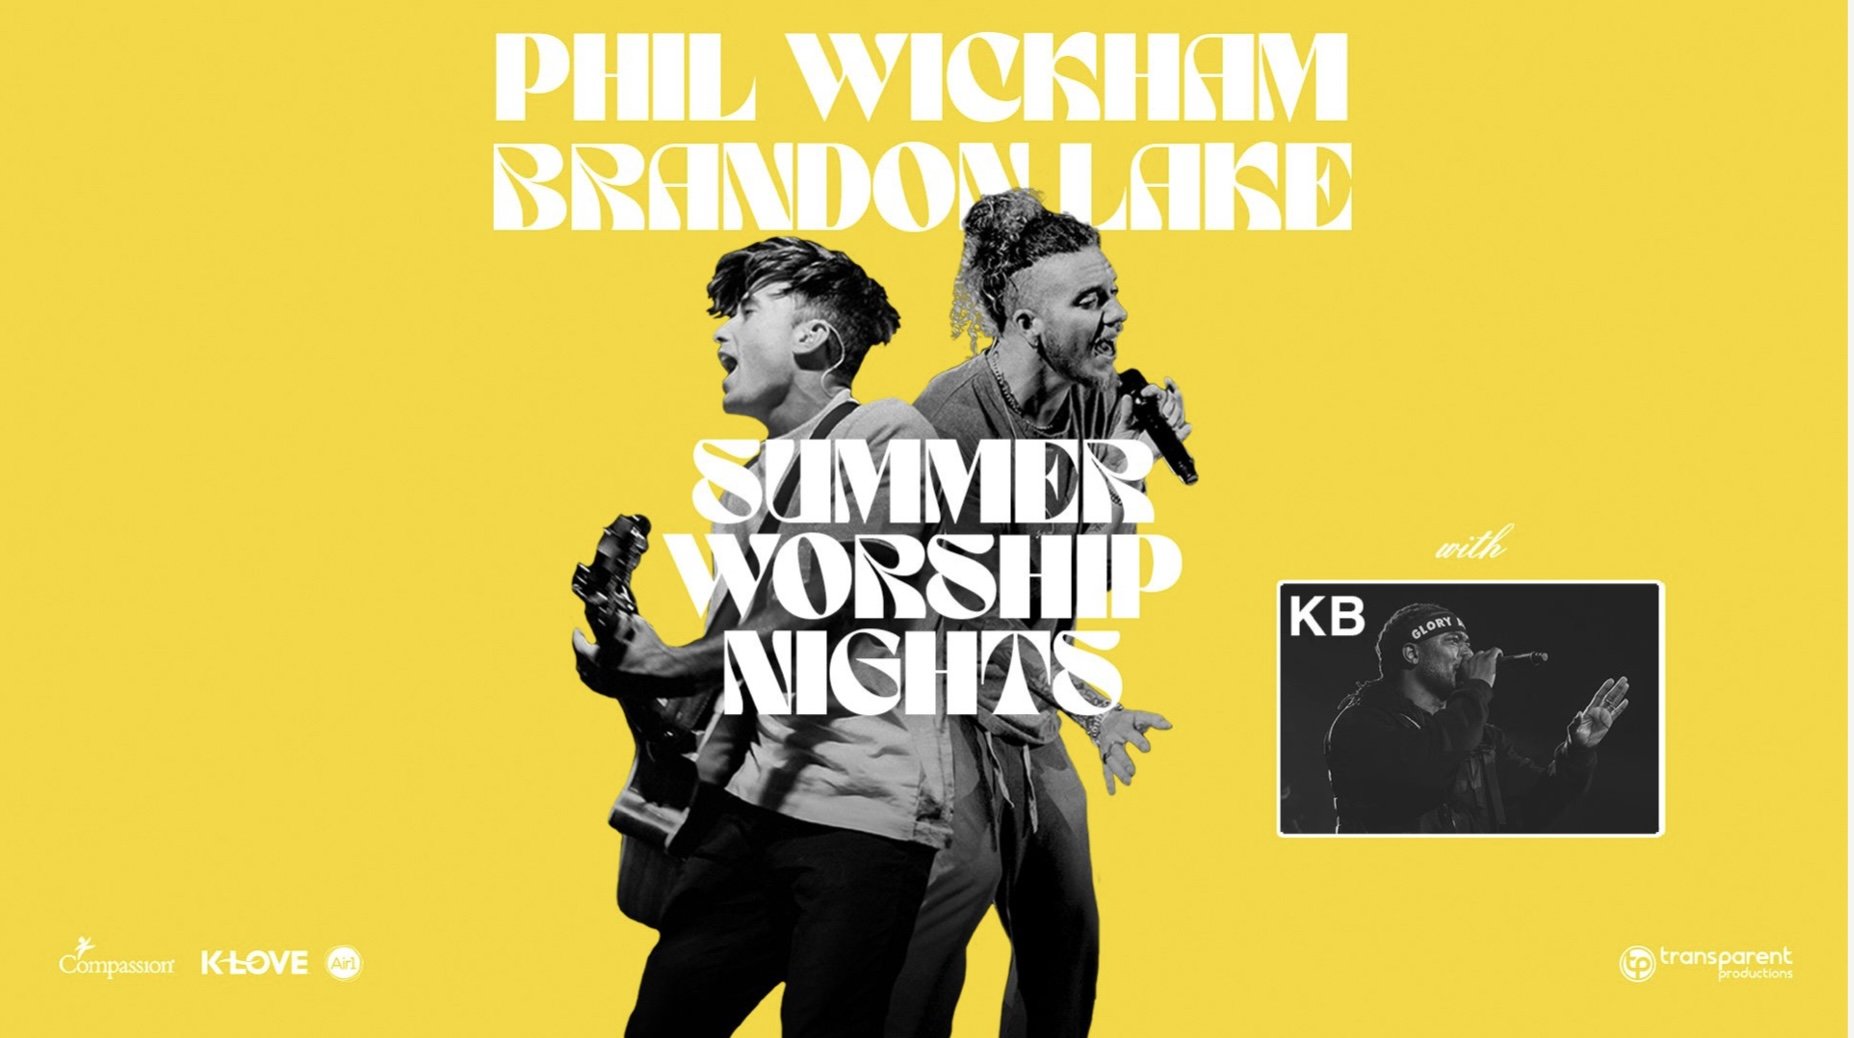 PHIL WICKHAM AND BRANDON LAKE JOIN FORCES FOR EPIC “SUMMER WORSHIP